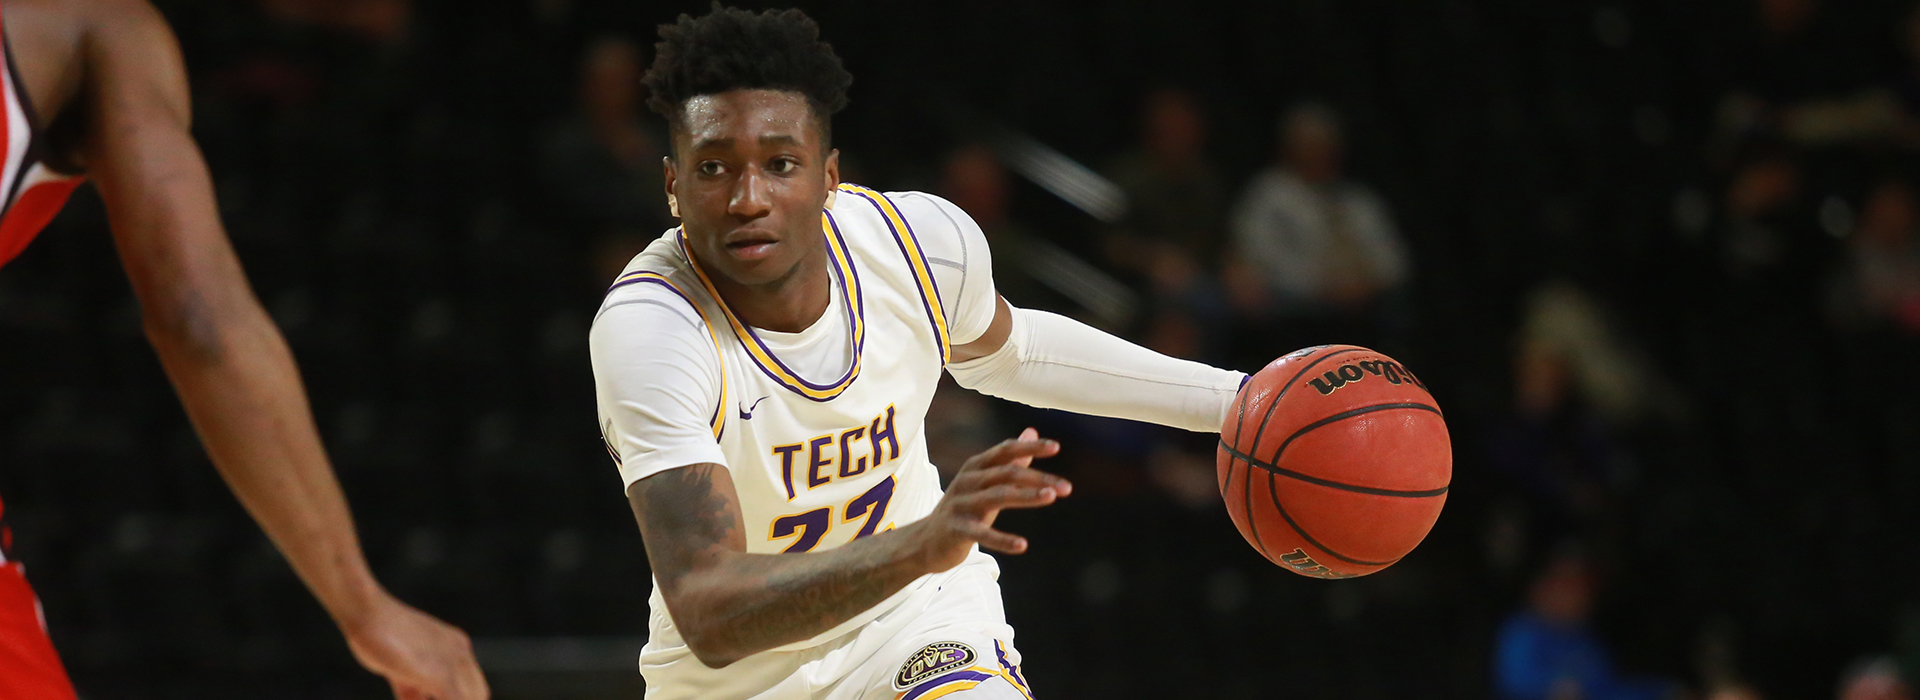 Tech men to open OVC play with Sunday home game against Jacksonville State